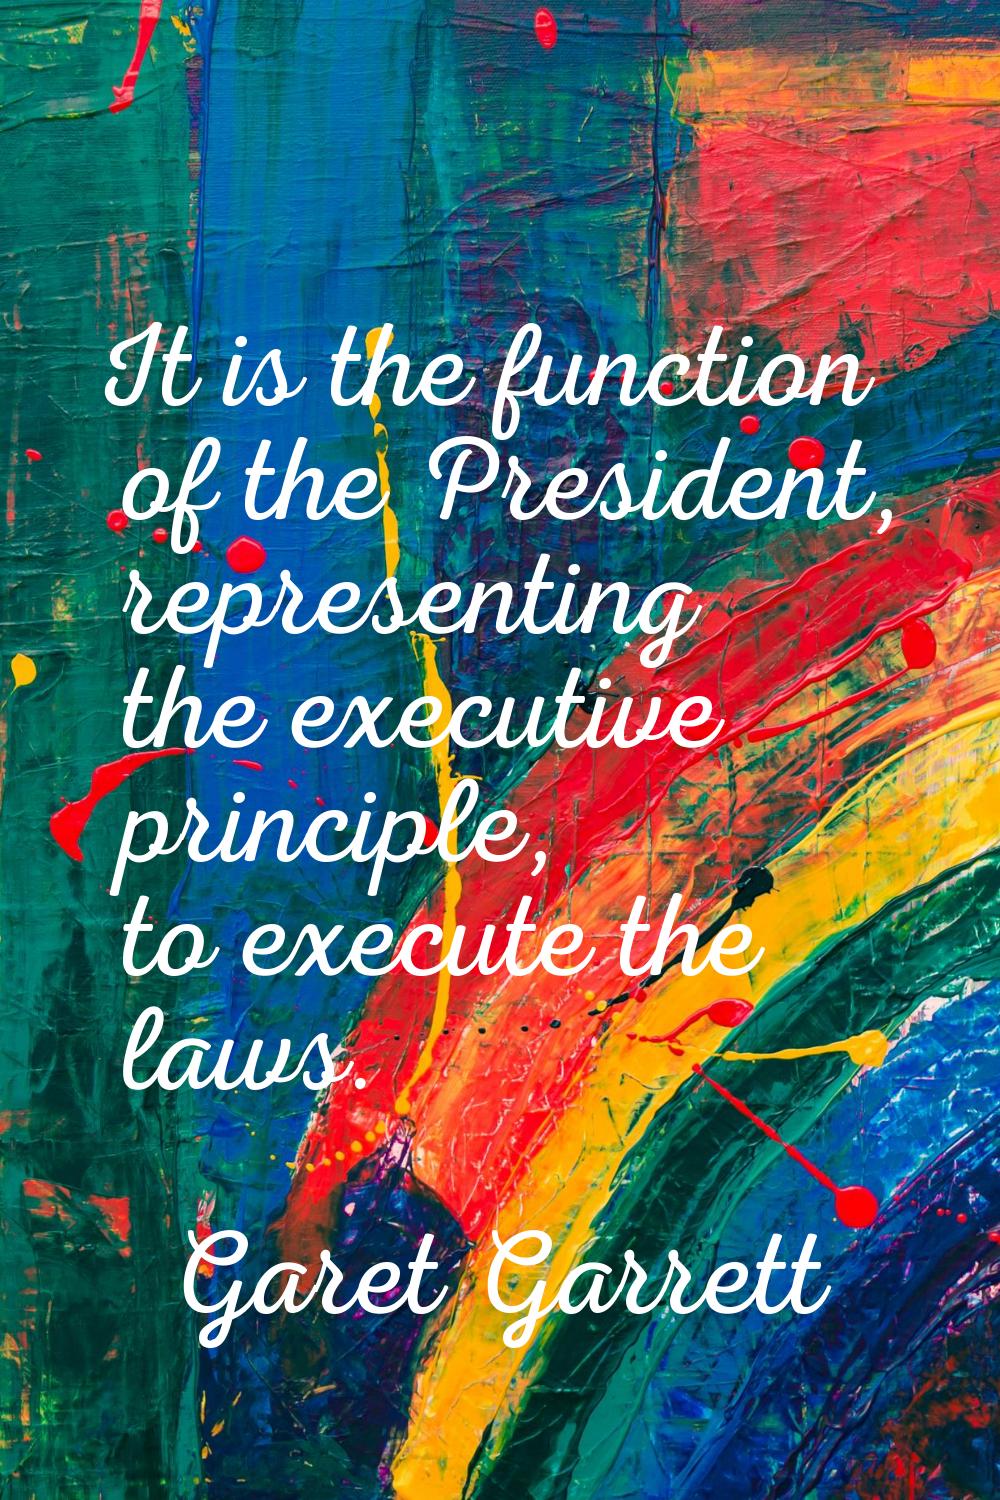 It is the function of the President, representing the executive principle, to execute the laws.